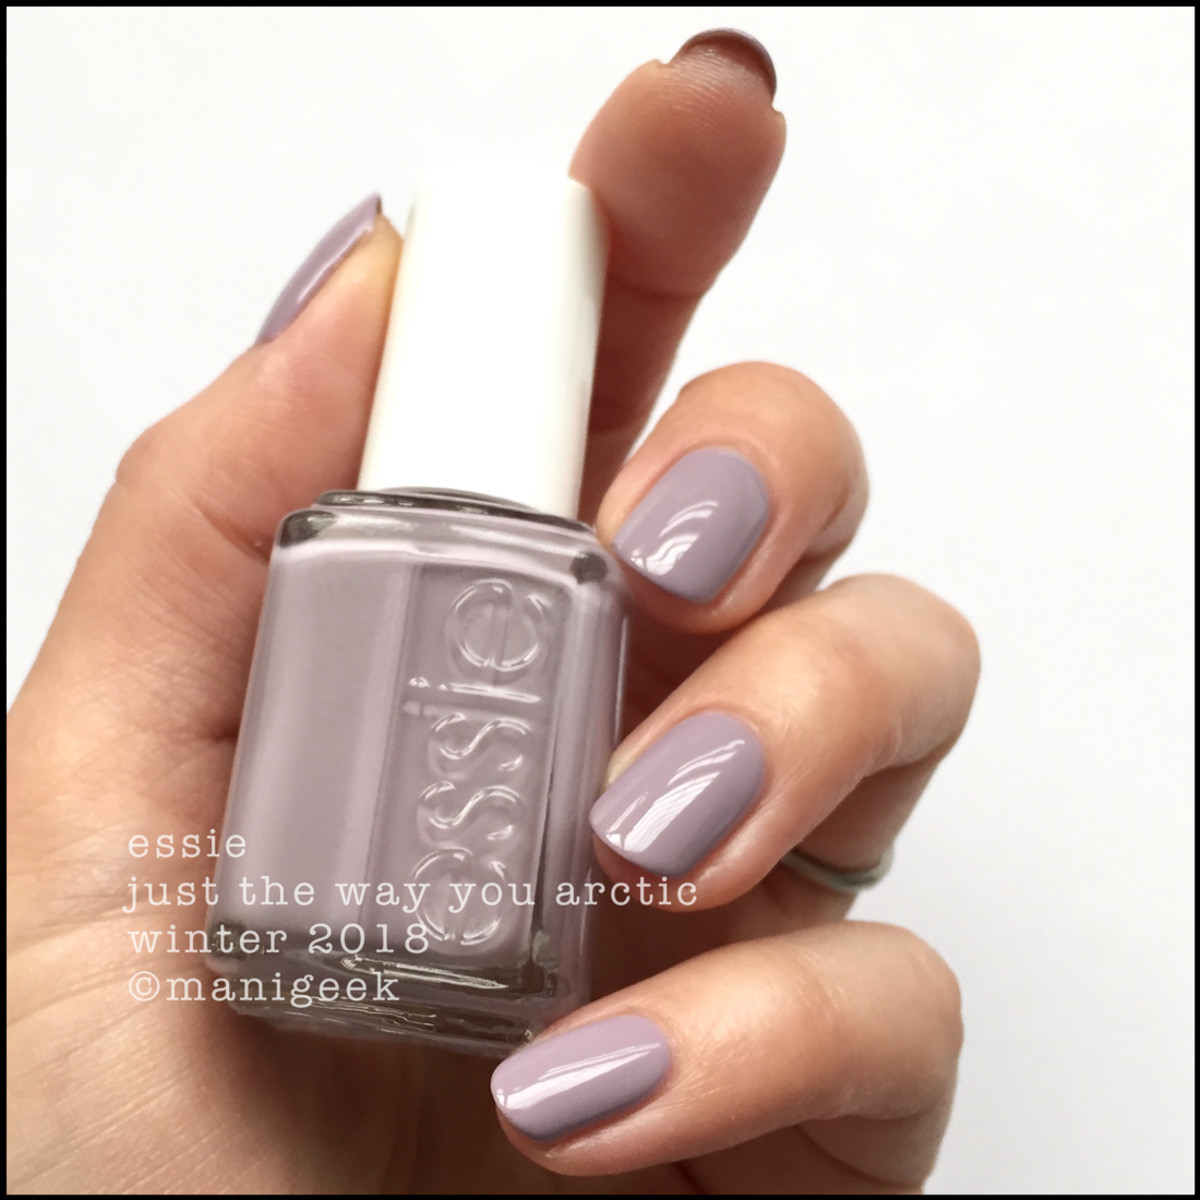 Essie Just the Way You Arctic - Essie Winter 2018 Swatches Review